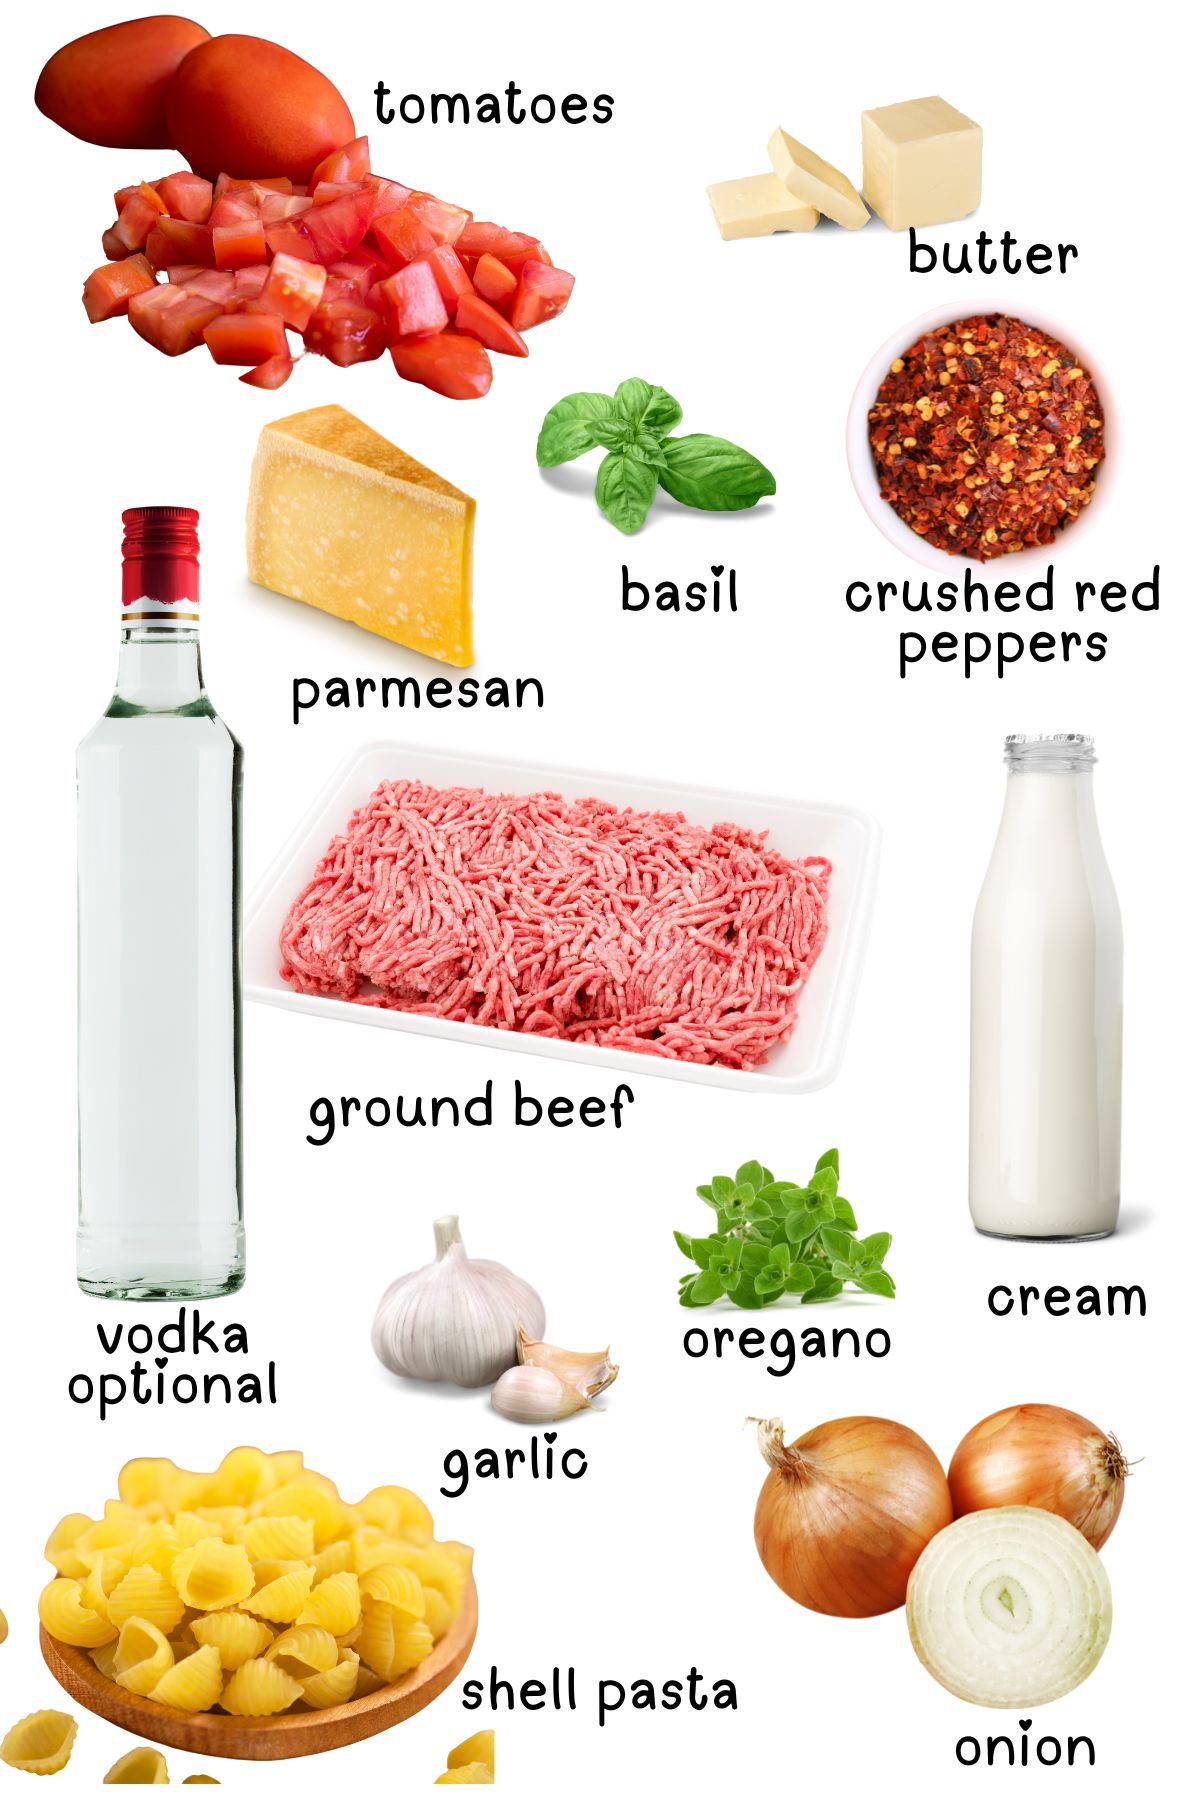 Labeled ingredients for shell pasta and ground beef with vodka sauce.